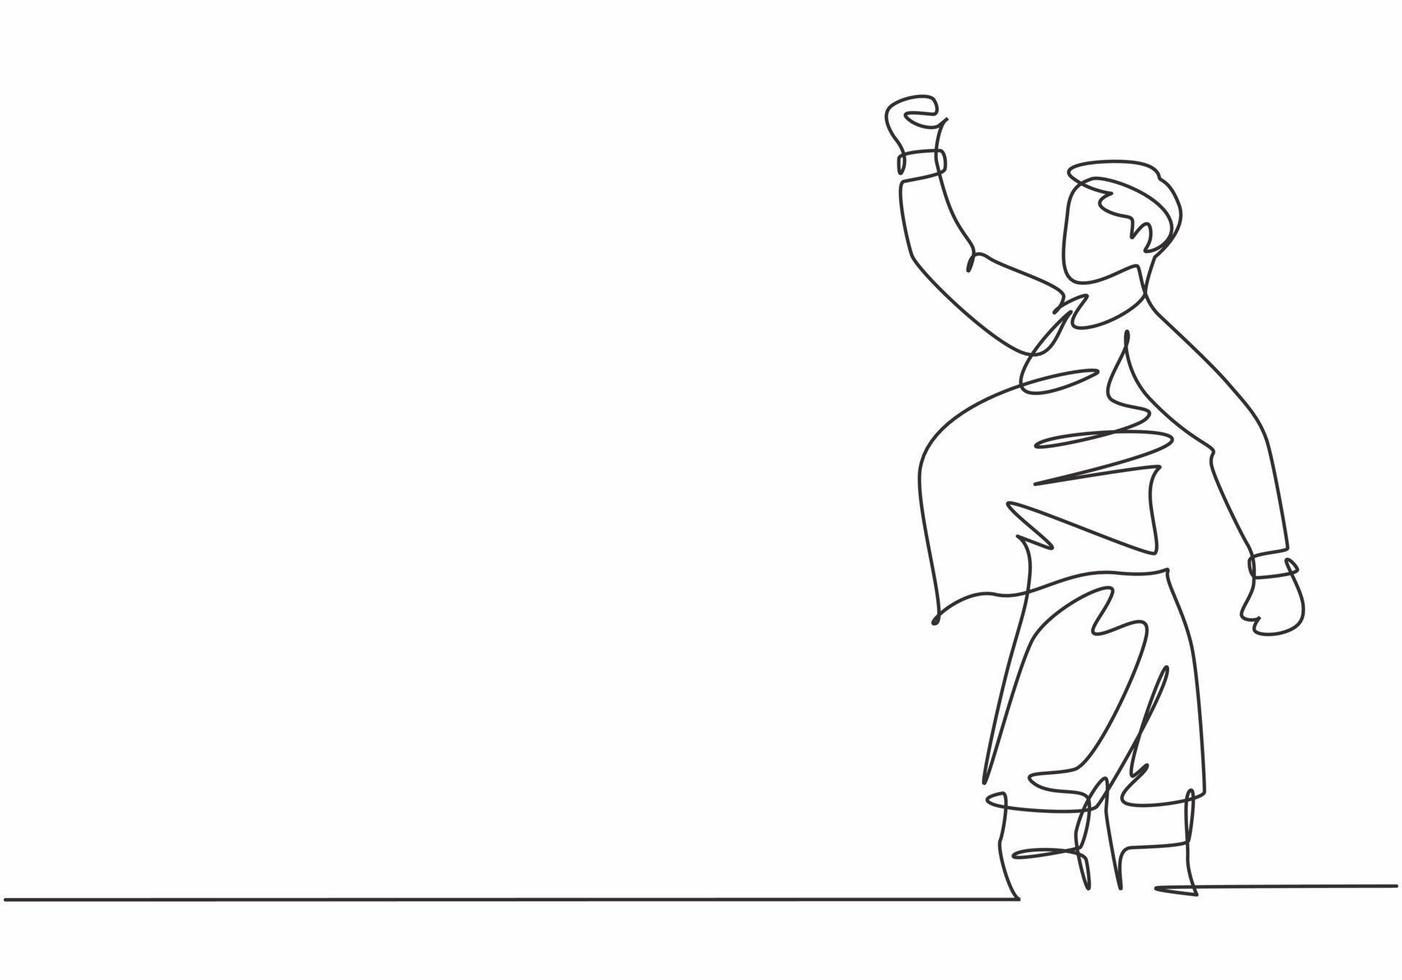 Single continuous line drawing of young sporty soccer player make pregnant gesture using ball after scoring the goal. Match soccer goal celebration concept one line draw design vector illustration